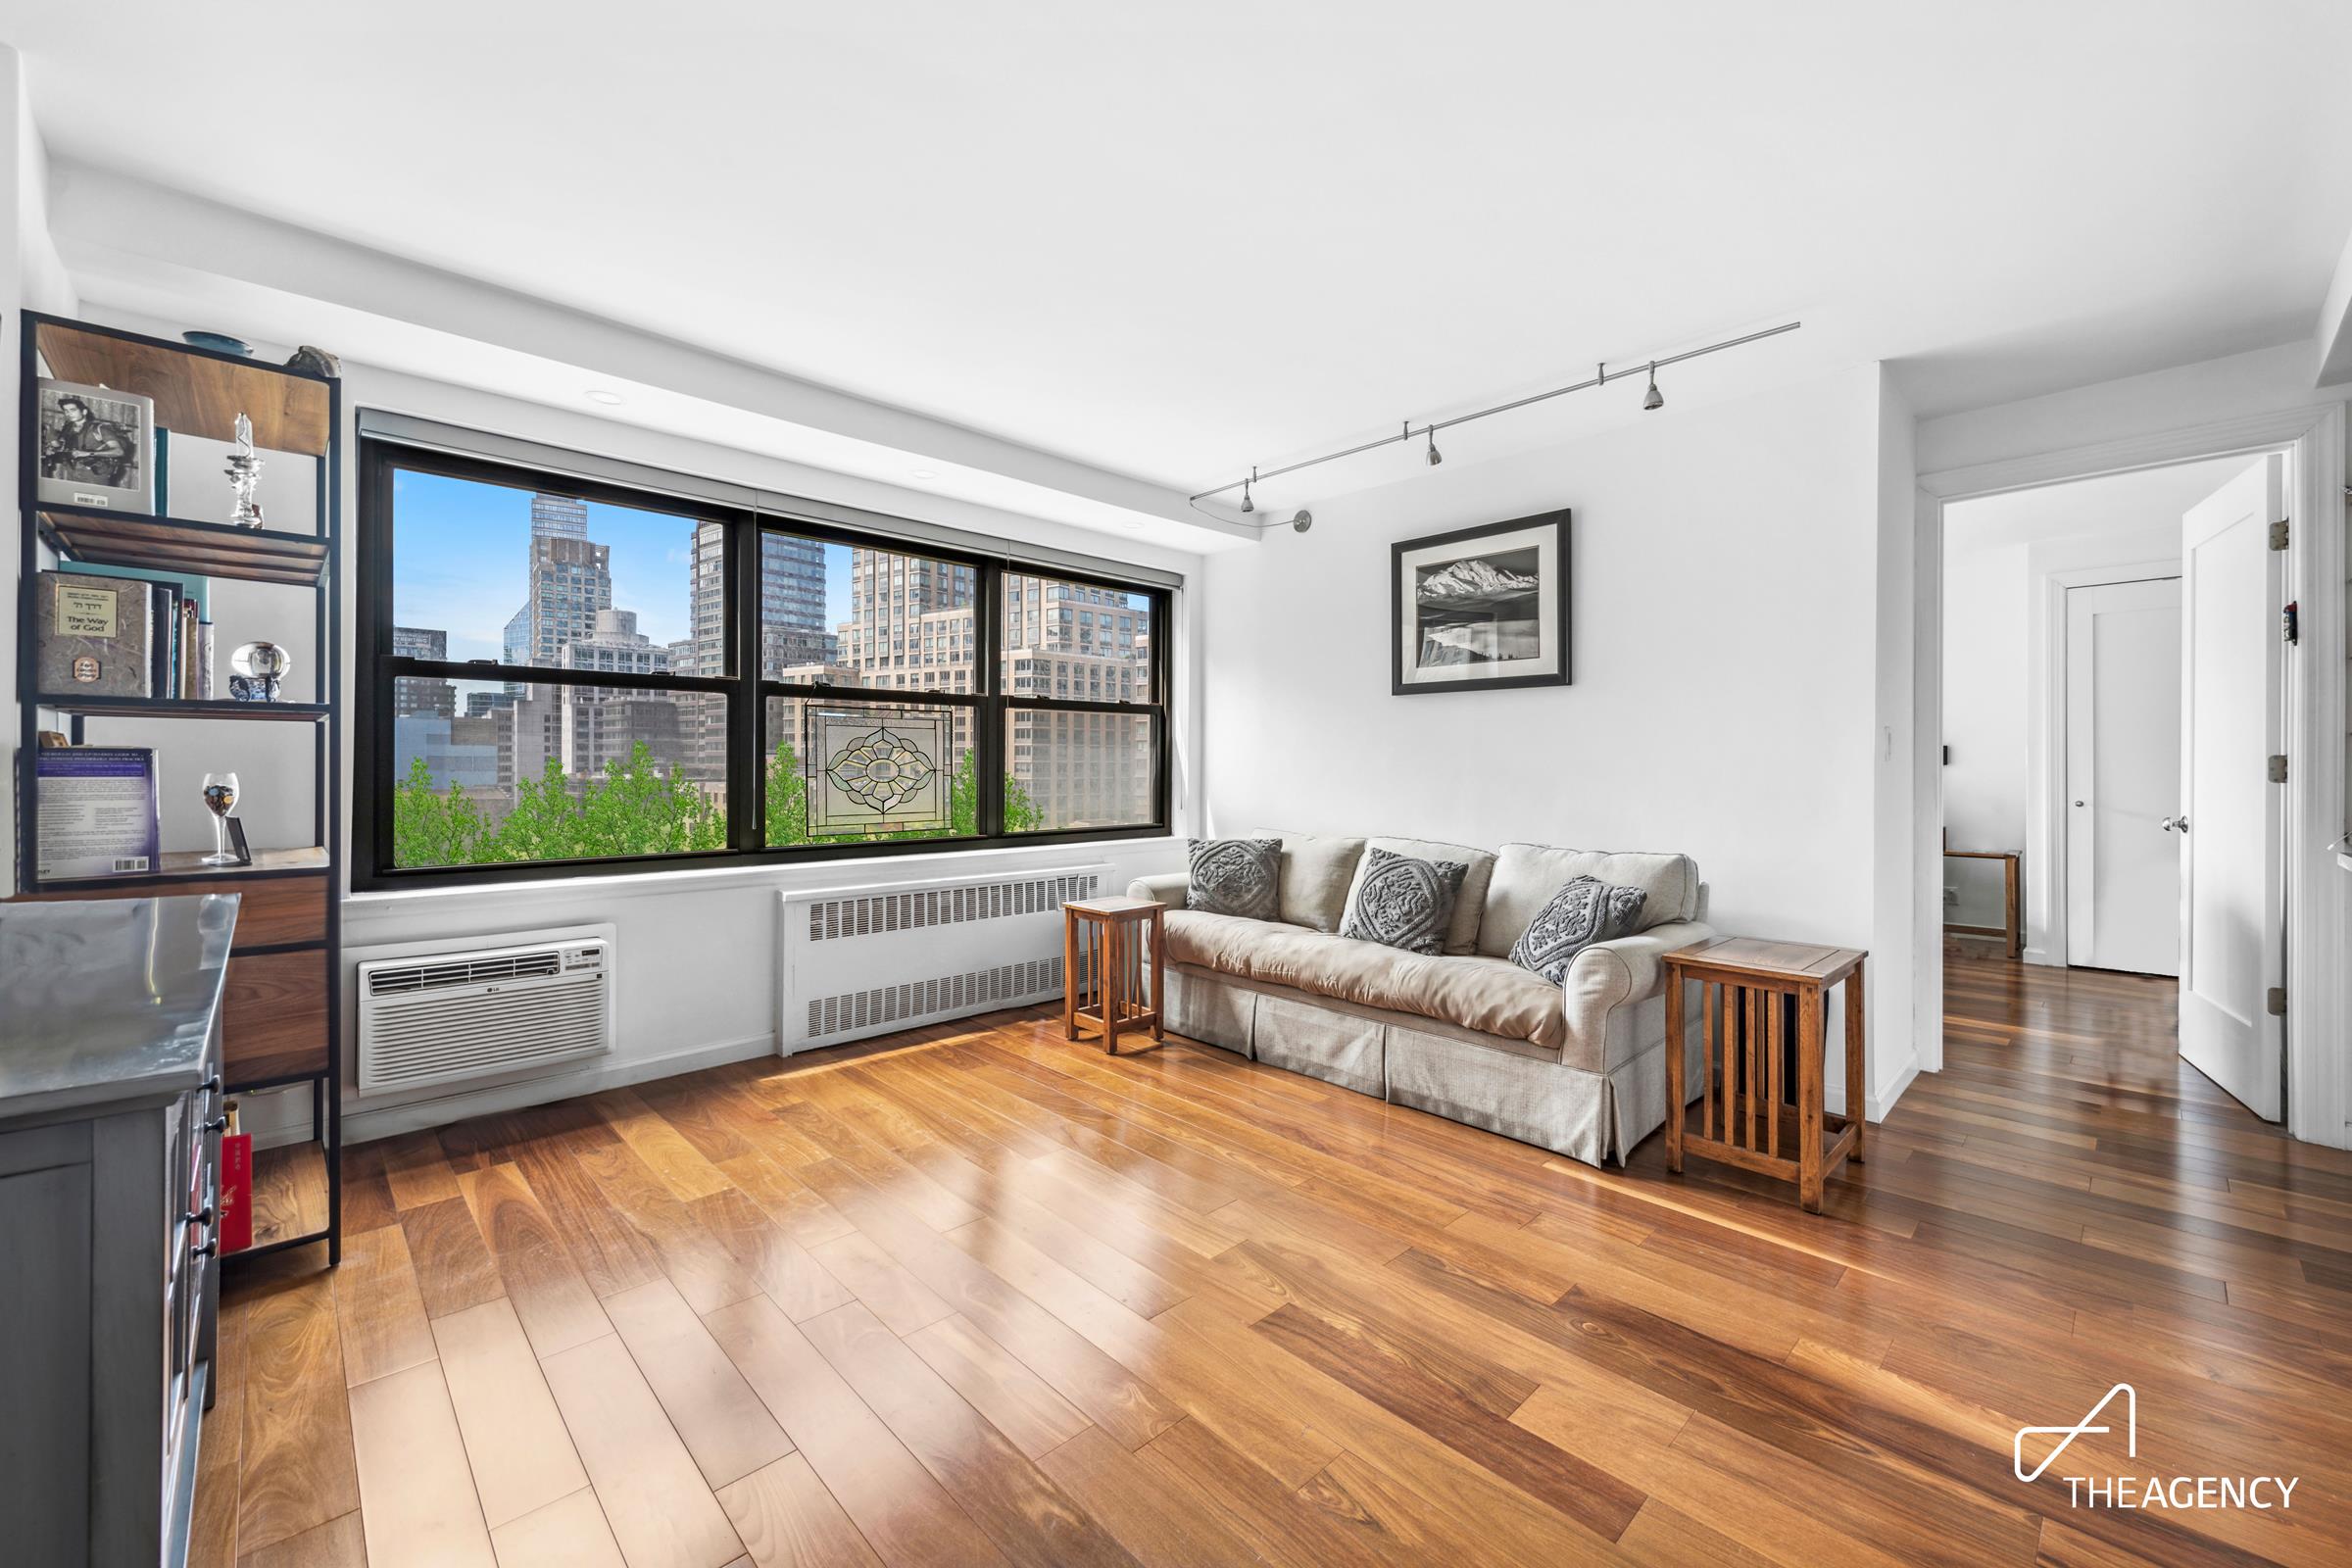 205 West End Avenue 8-K, Lincoln Square, Upper West Side, NYC - 1 Bedrooms  
1 Bathrooms  
3 Rooms - 